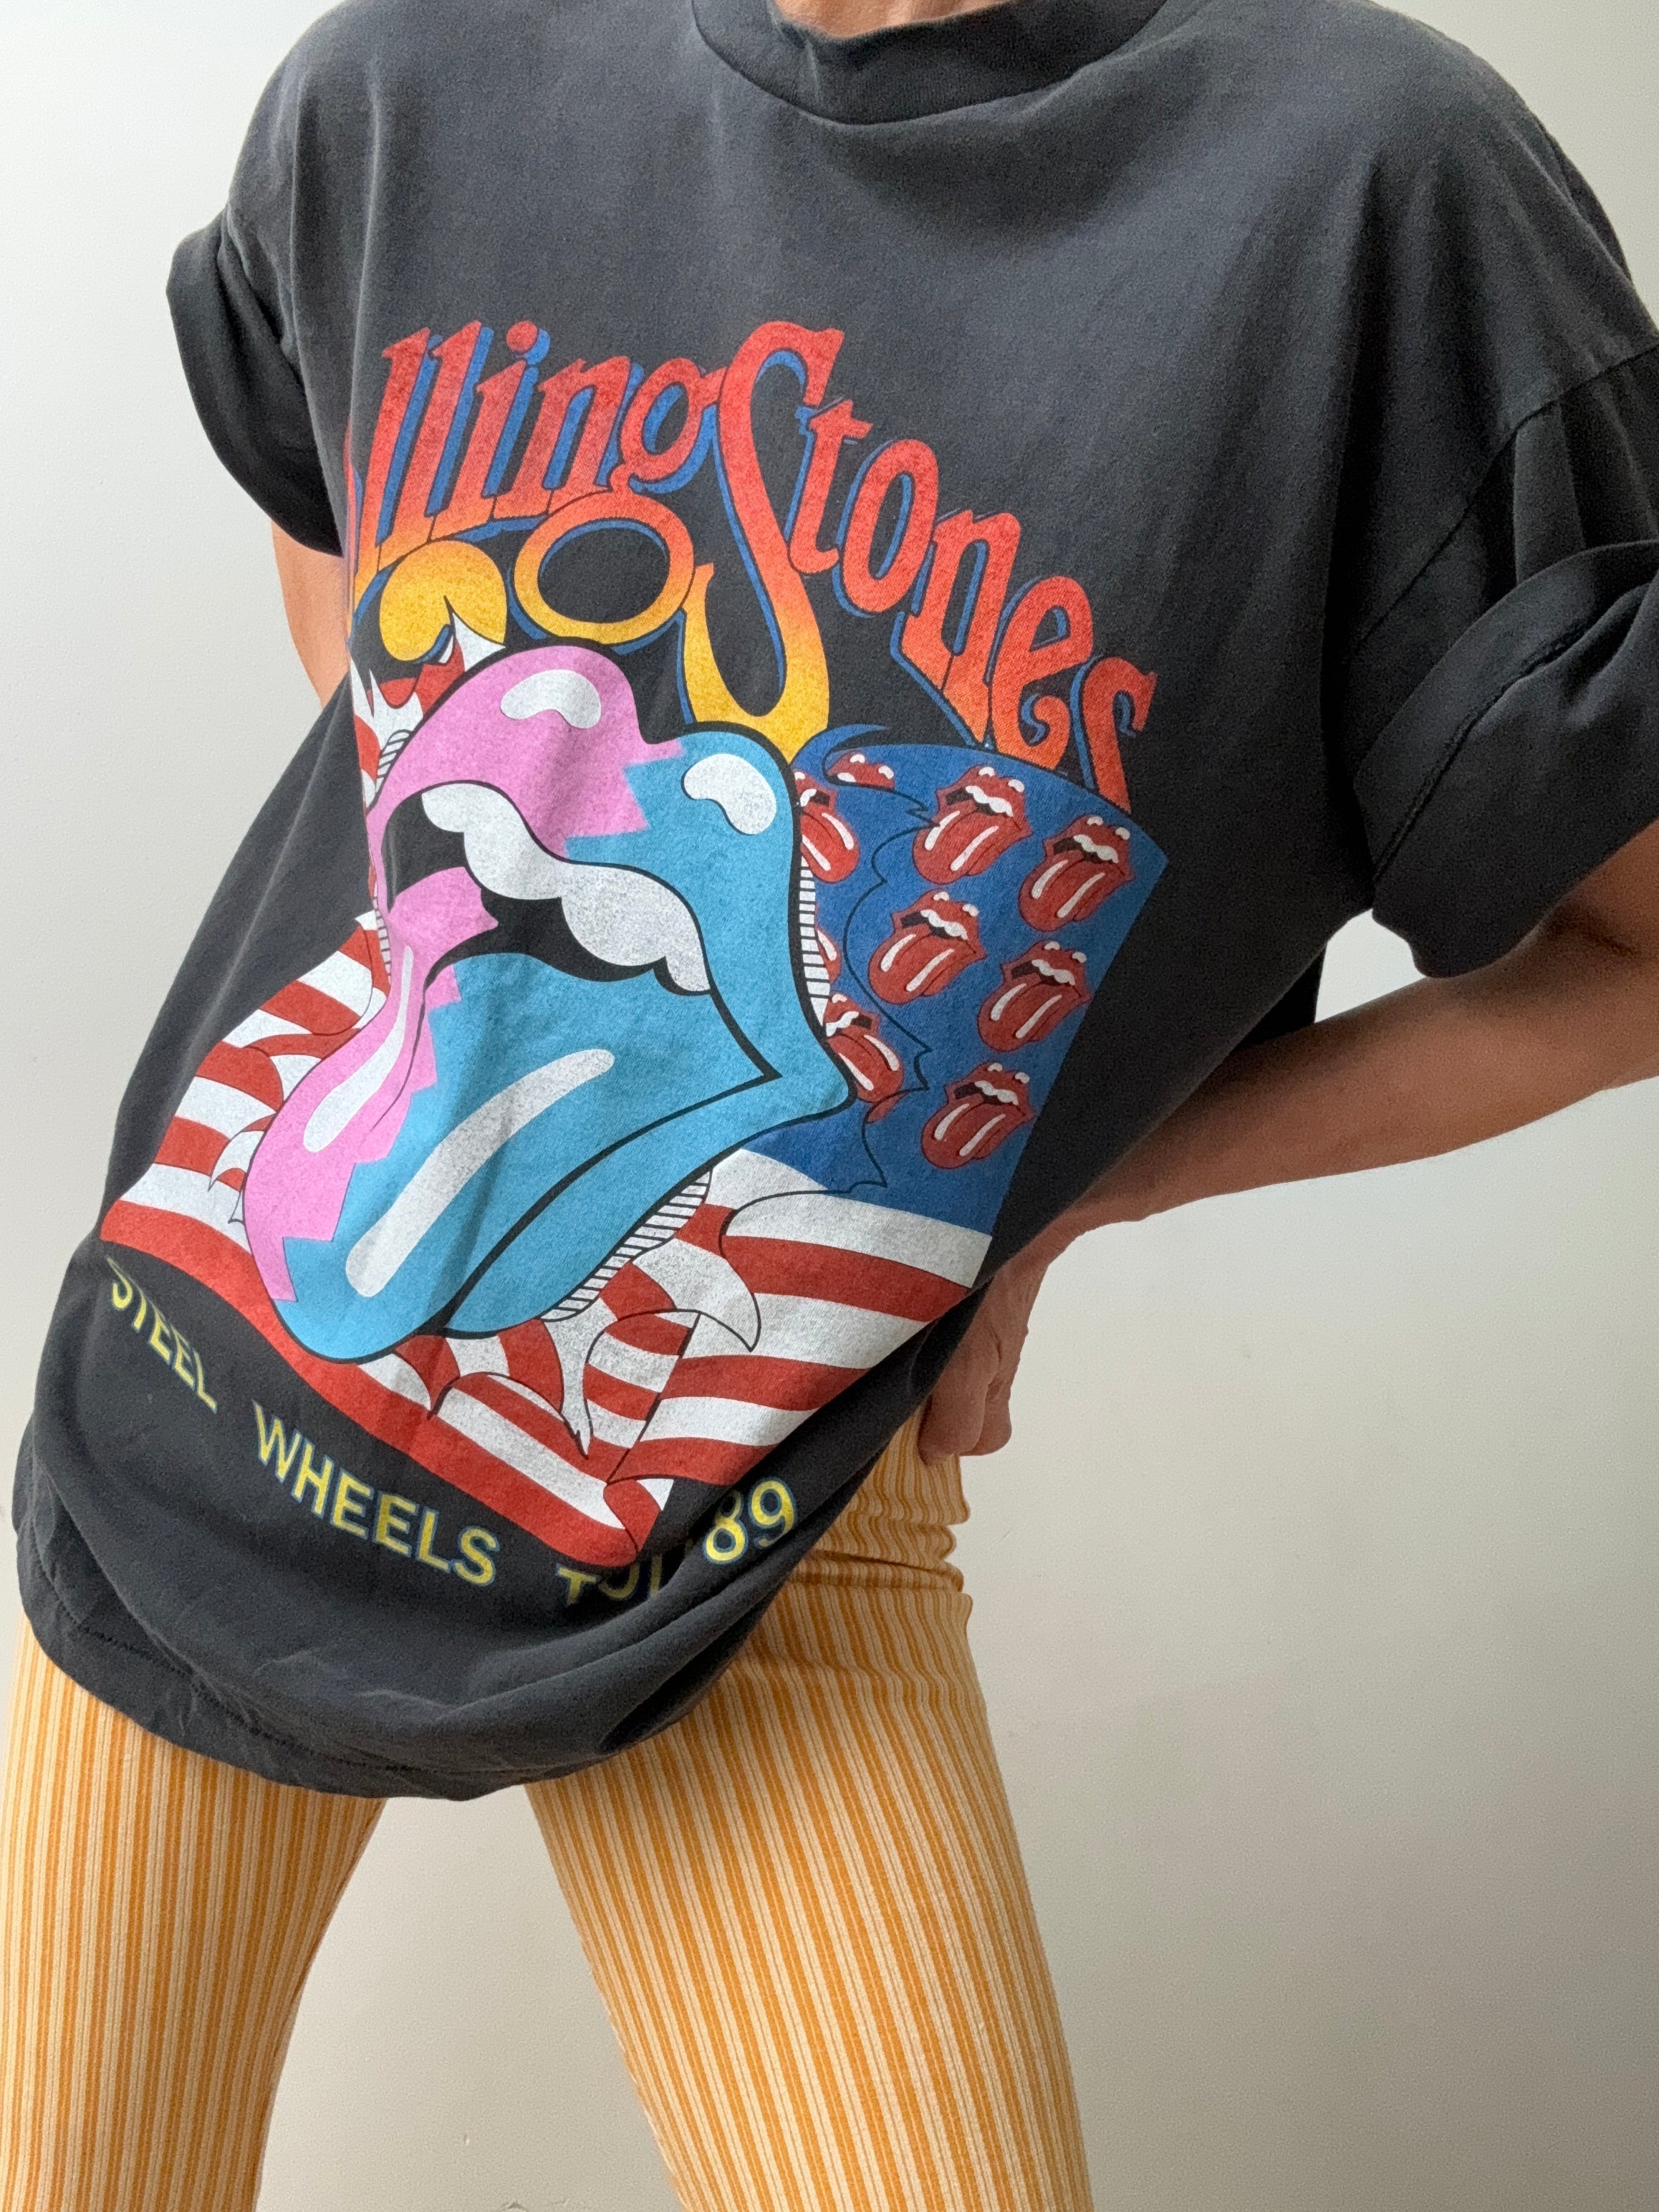 Future Nomads Tops Vintage Style Tee Rolling Stones